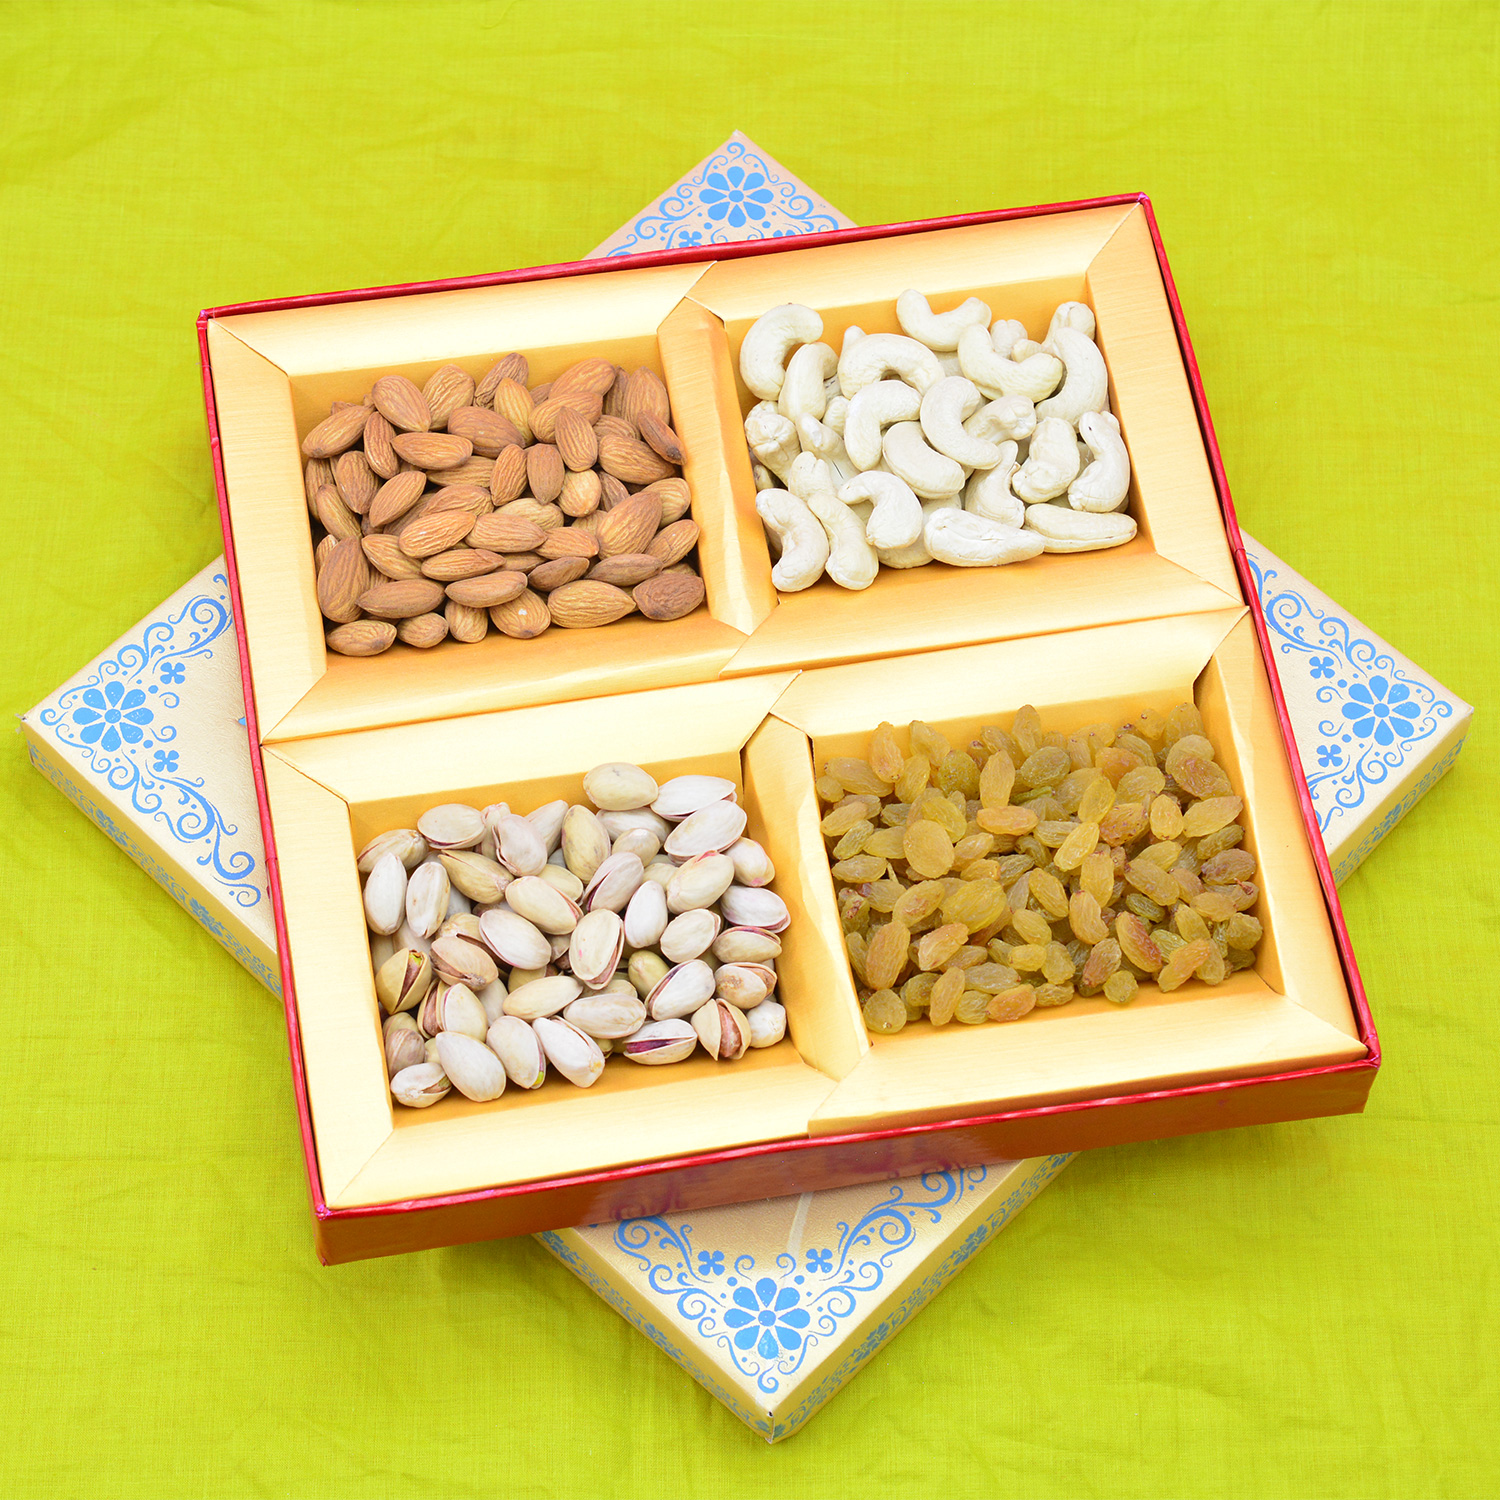 Golden Base Transparent Upper Cover Dry Fruit Box with 4 Types of Dry Fruits